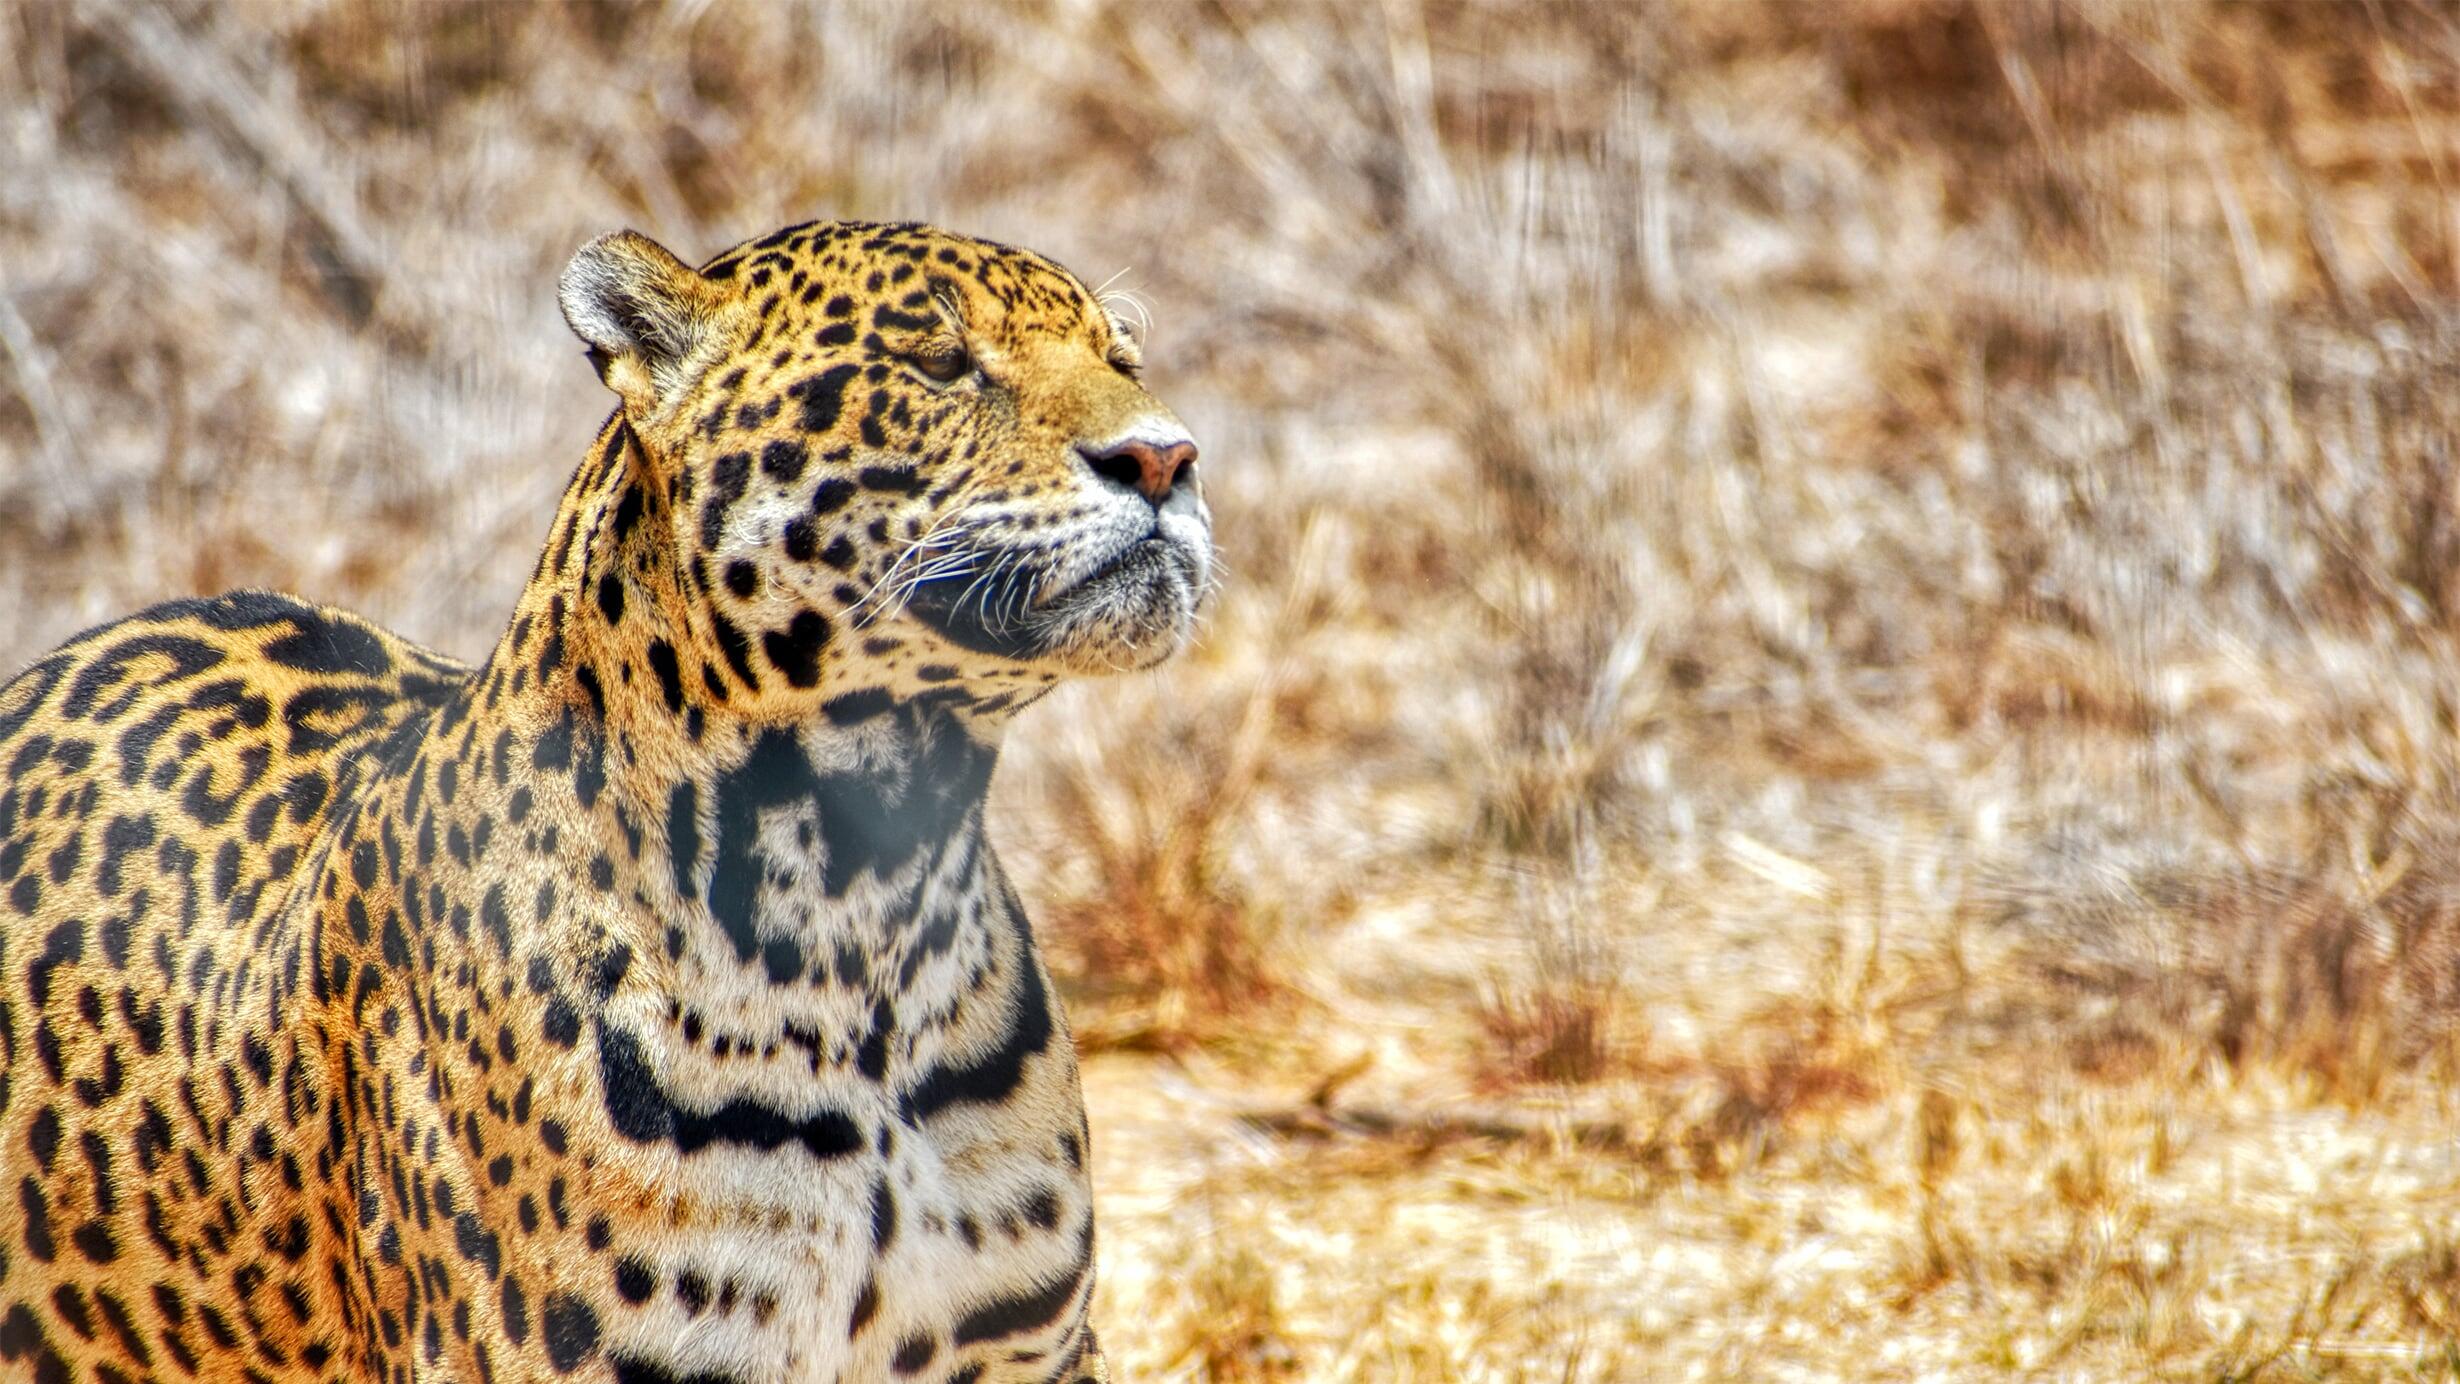 A close-up photograph of a jaguar, strolling in dry scrub grass at a sanctuary for rescued animals in Oaxaca, Mexico.